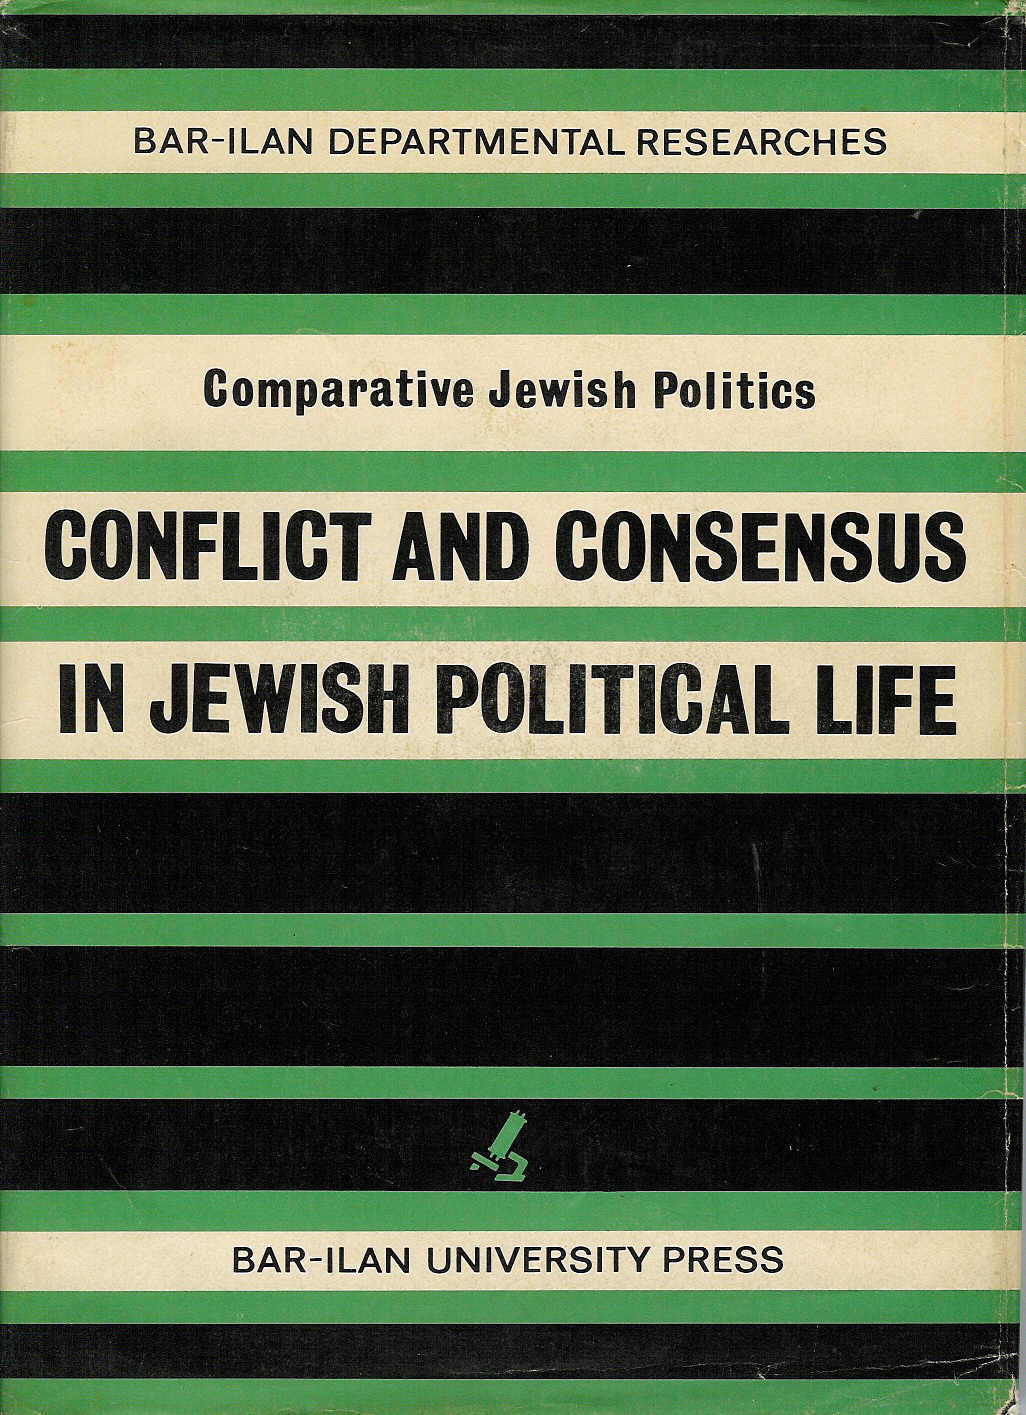 Conflict and Consensus in Jewish Political Life